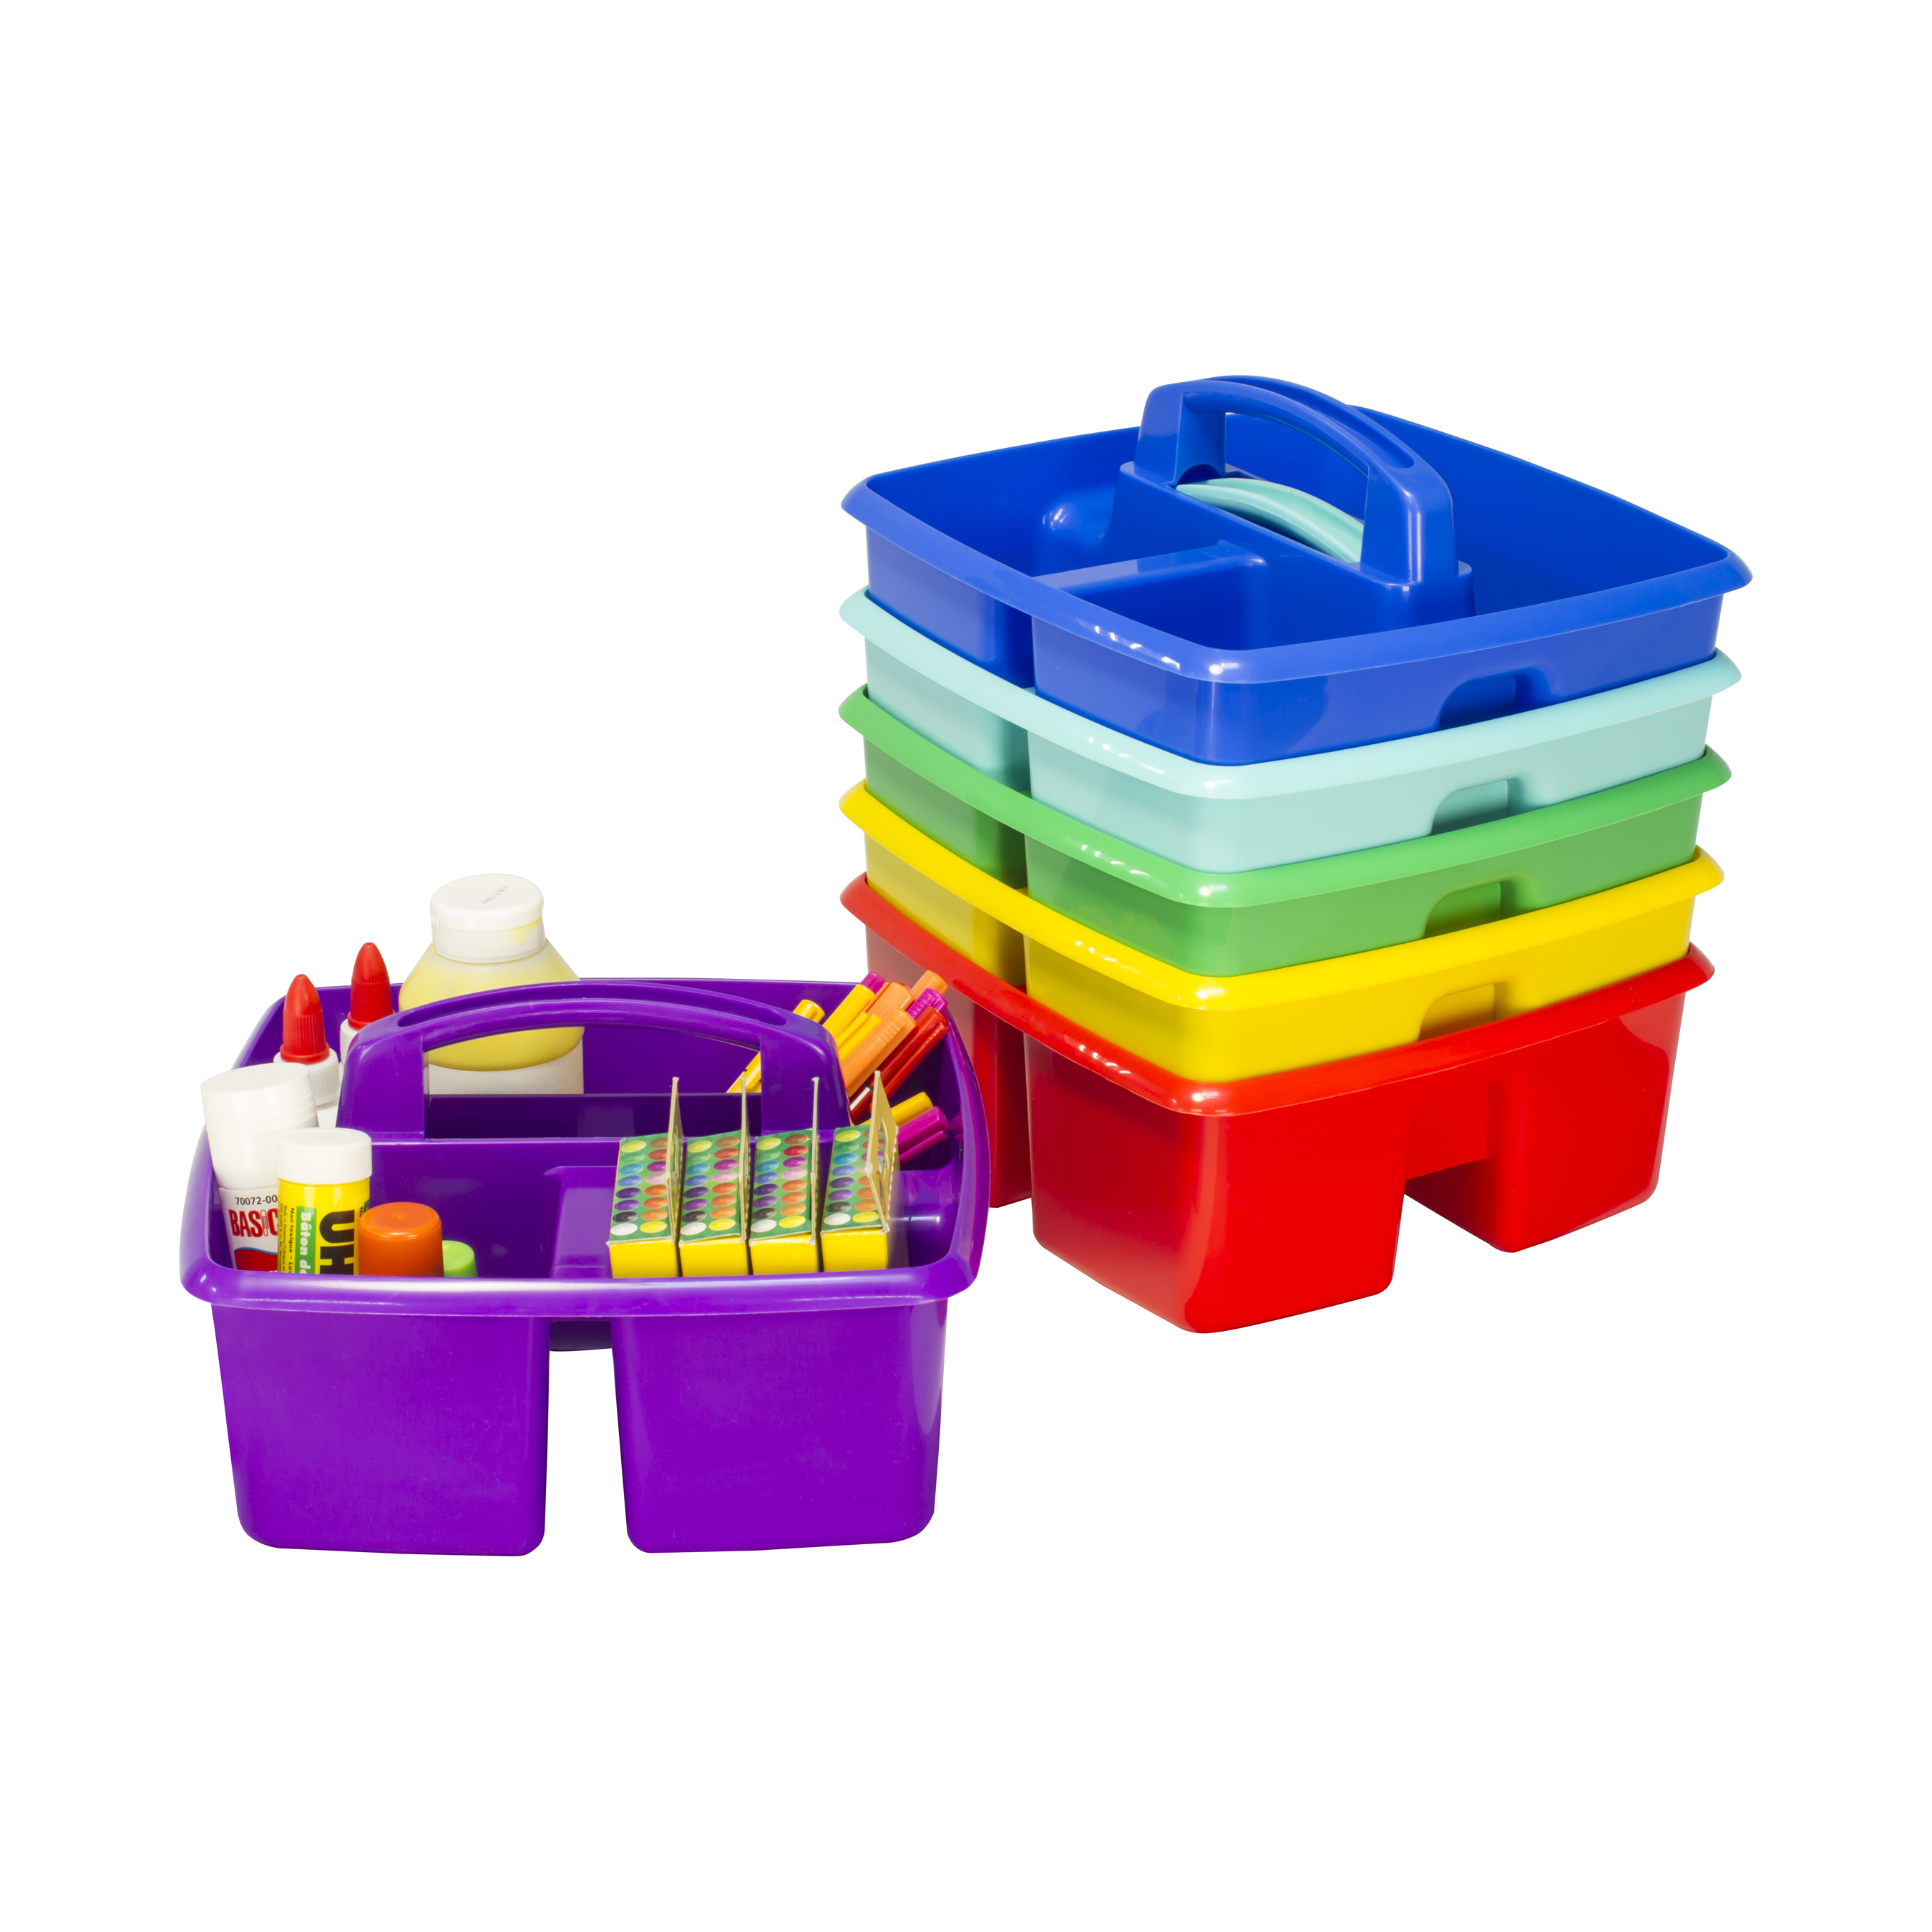 6 Assorted Colors Classroom Office & School Supplies Caddy 9.25 X 5.25 Inches 